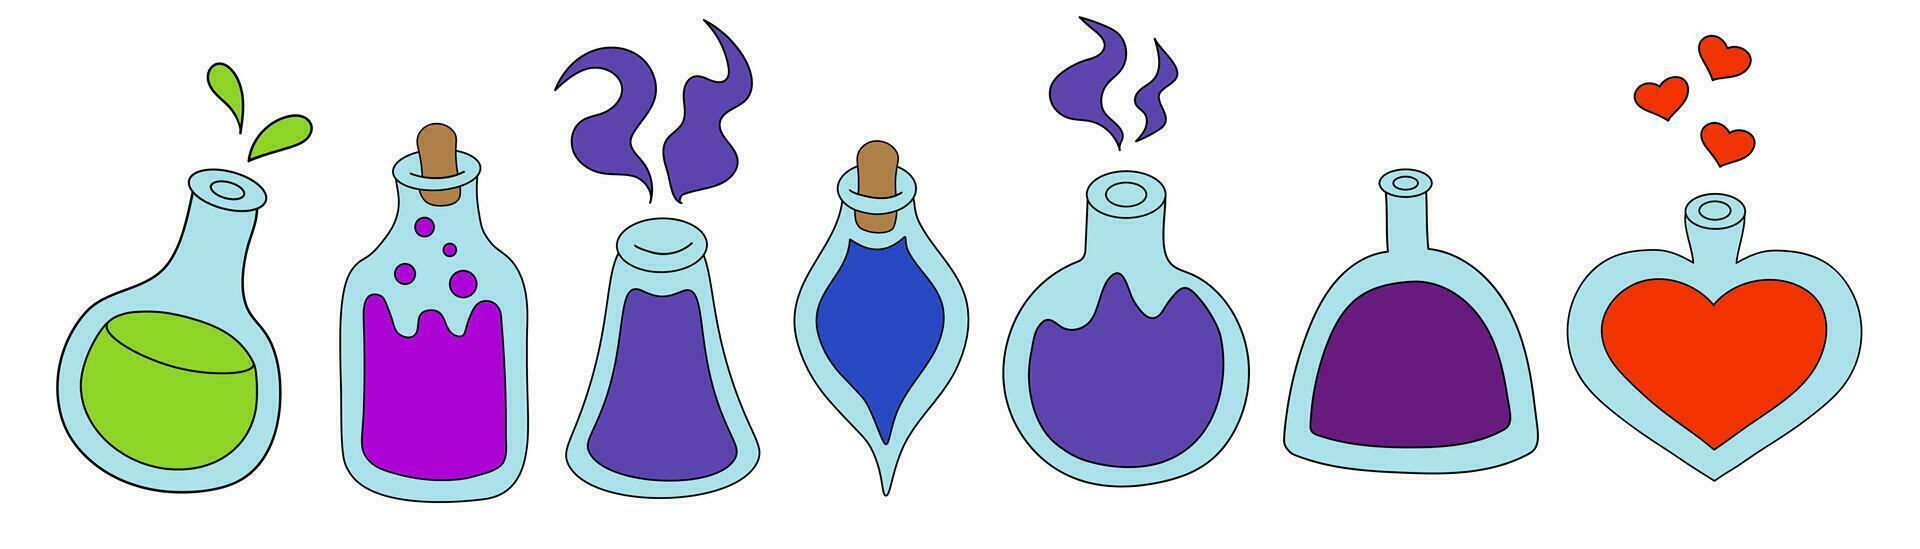 Potion bottles set isolated on white background. Cartoon flat vector illustration of different shape glass jars with colorful liquid substance. Magic shop, witchcraft accessories